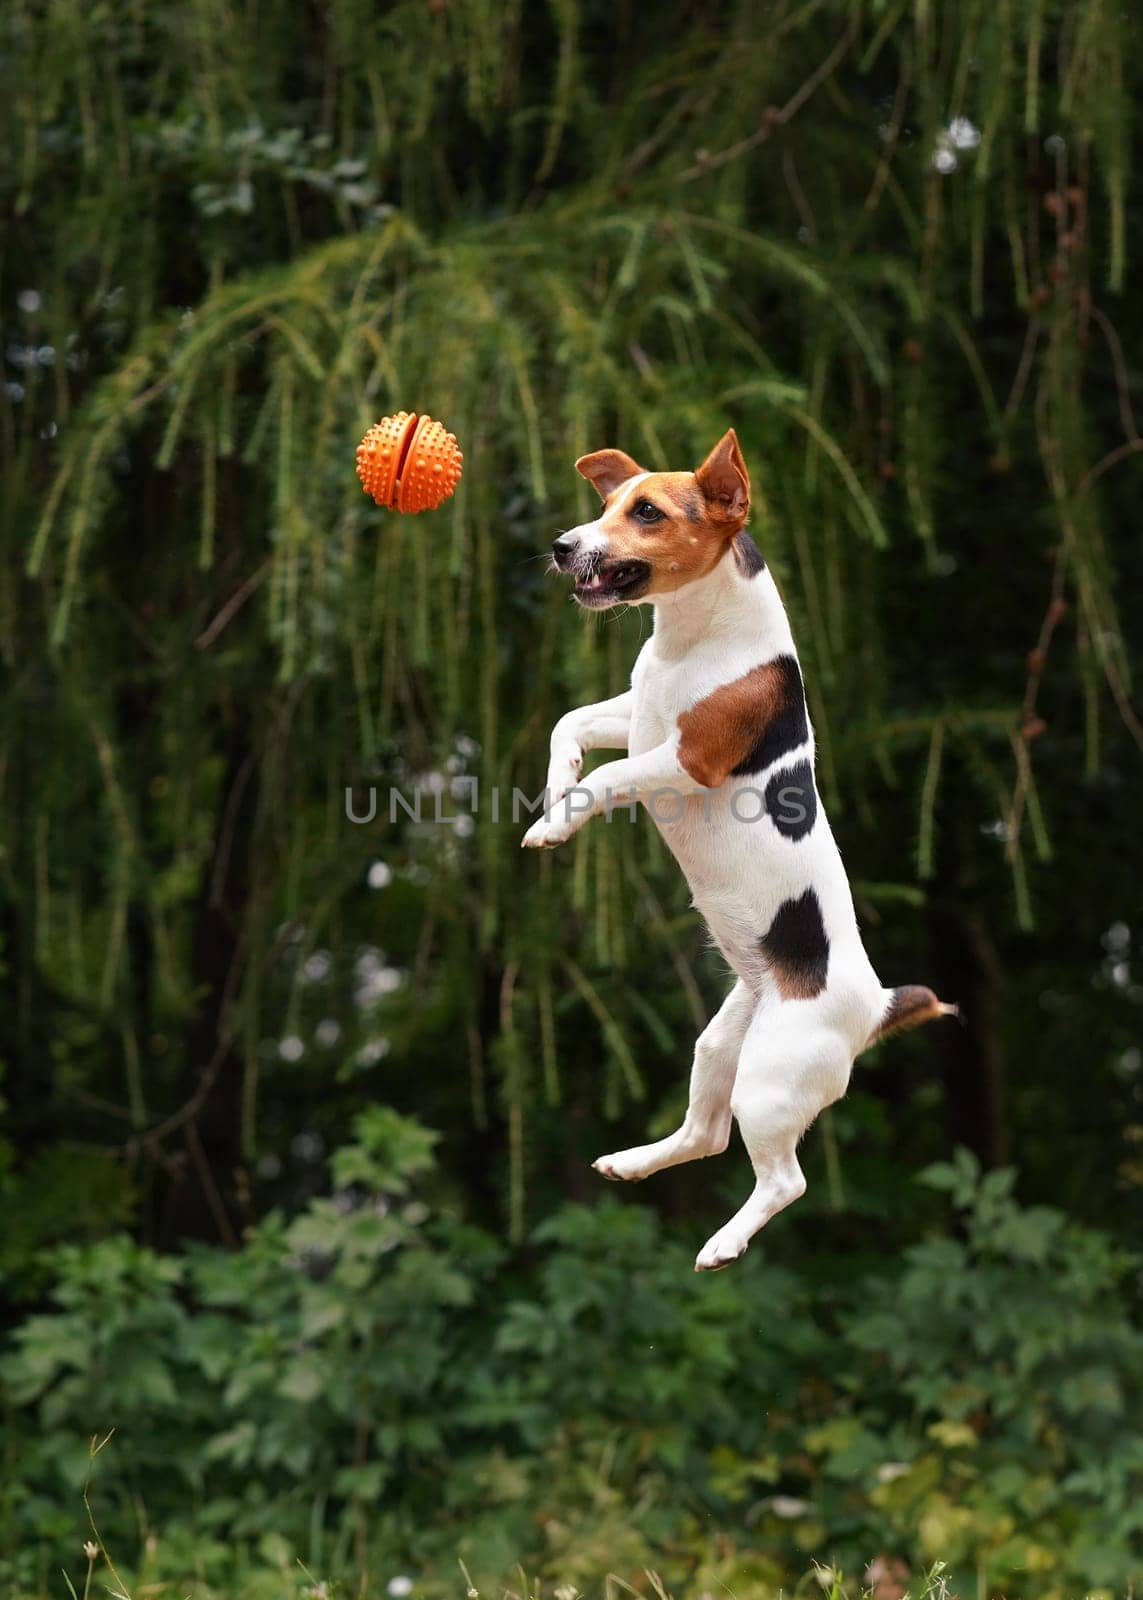 Jack Russell terrier jumping high in the air after orange playing ball, blurred trees background